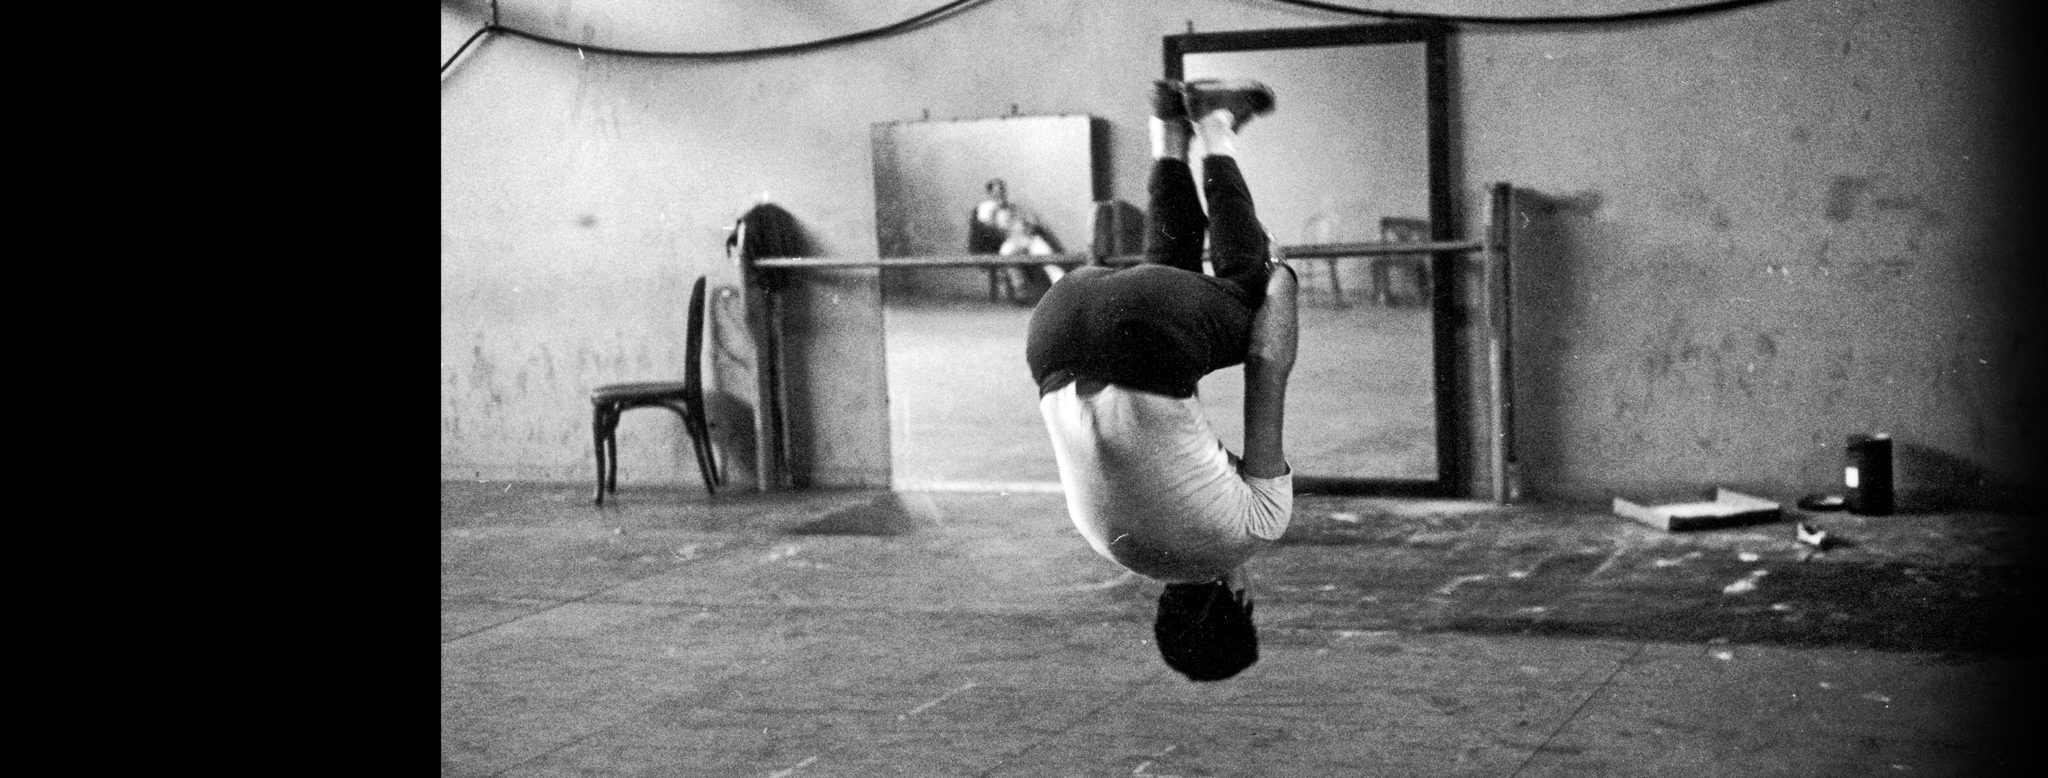 An actor performs a standing somersault during acrobatic rehearsals for 'West Side Story', a film musical directed by Jerome Robbins and Robert Wise, with words and music by Leonard Bernstein and Stephen Sondheim. / Credit: Ernst Haas/Ernst Haas/Getty Images